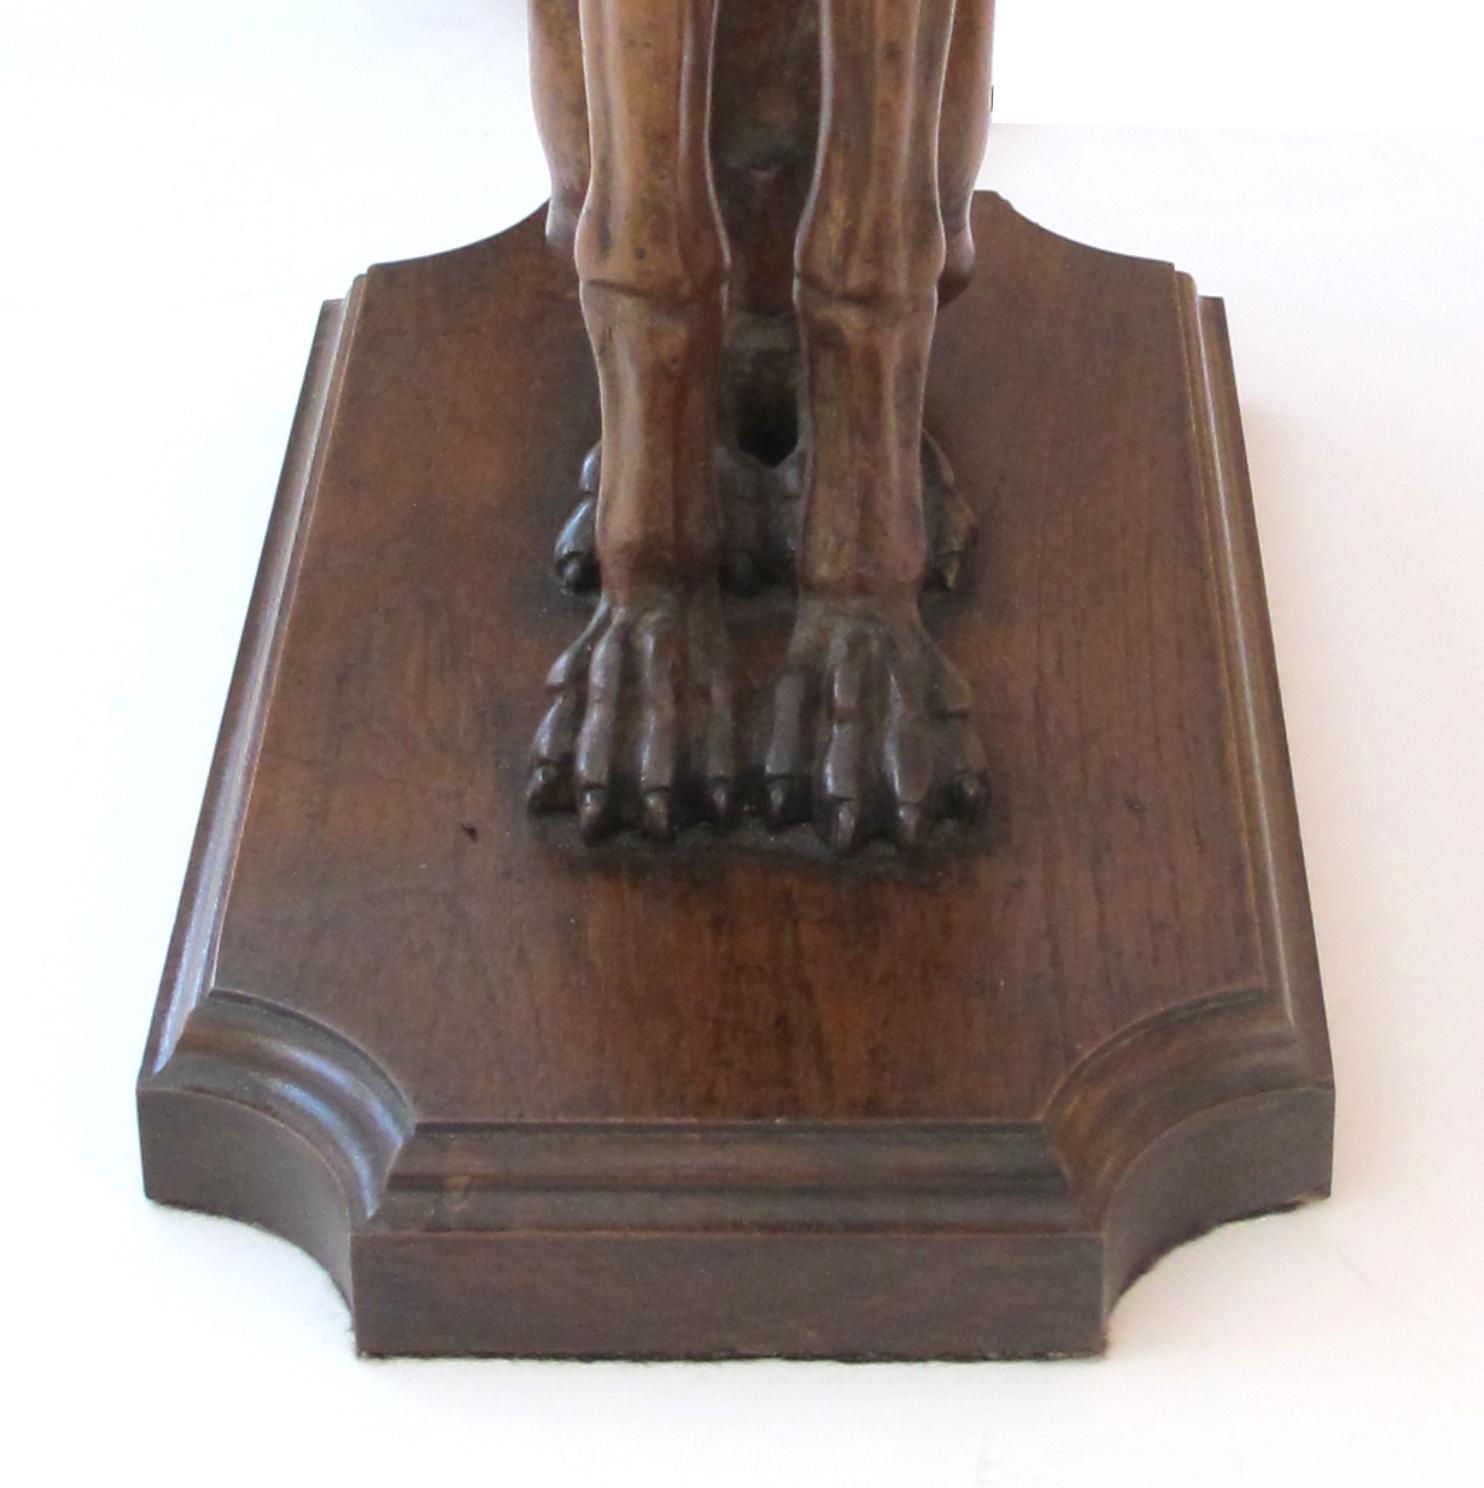 Each hand carved architectural elements of seated greyhounds with direct gaze and muscled bodies, now mounted as lamps.